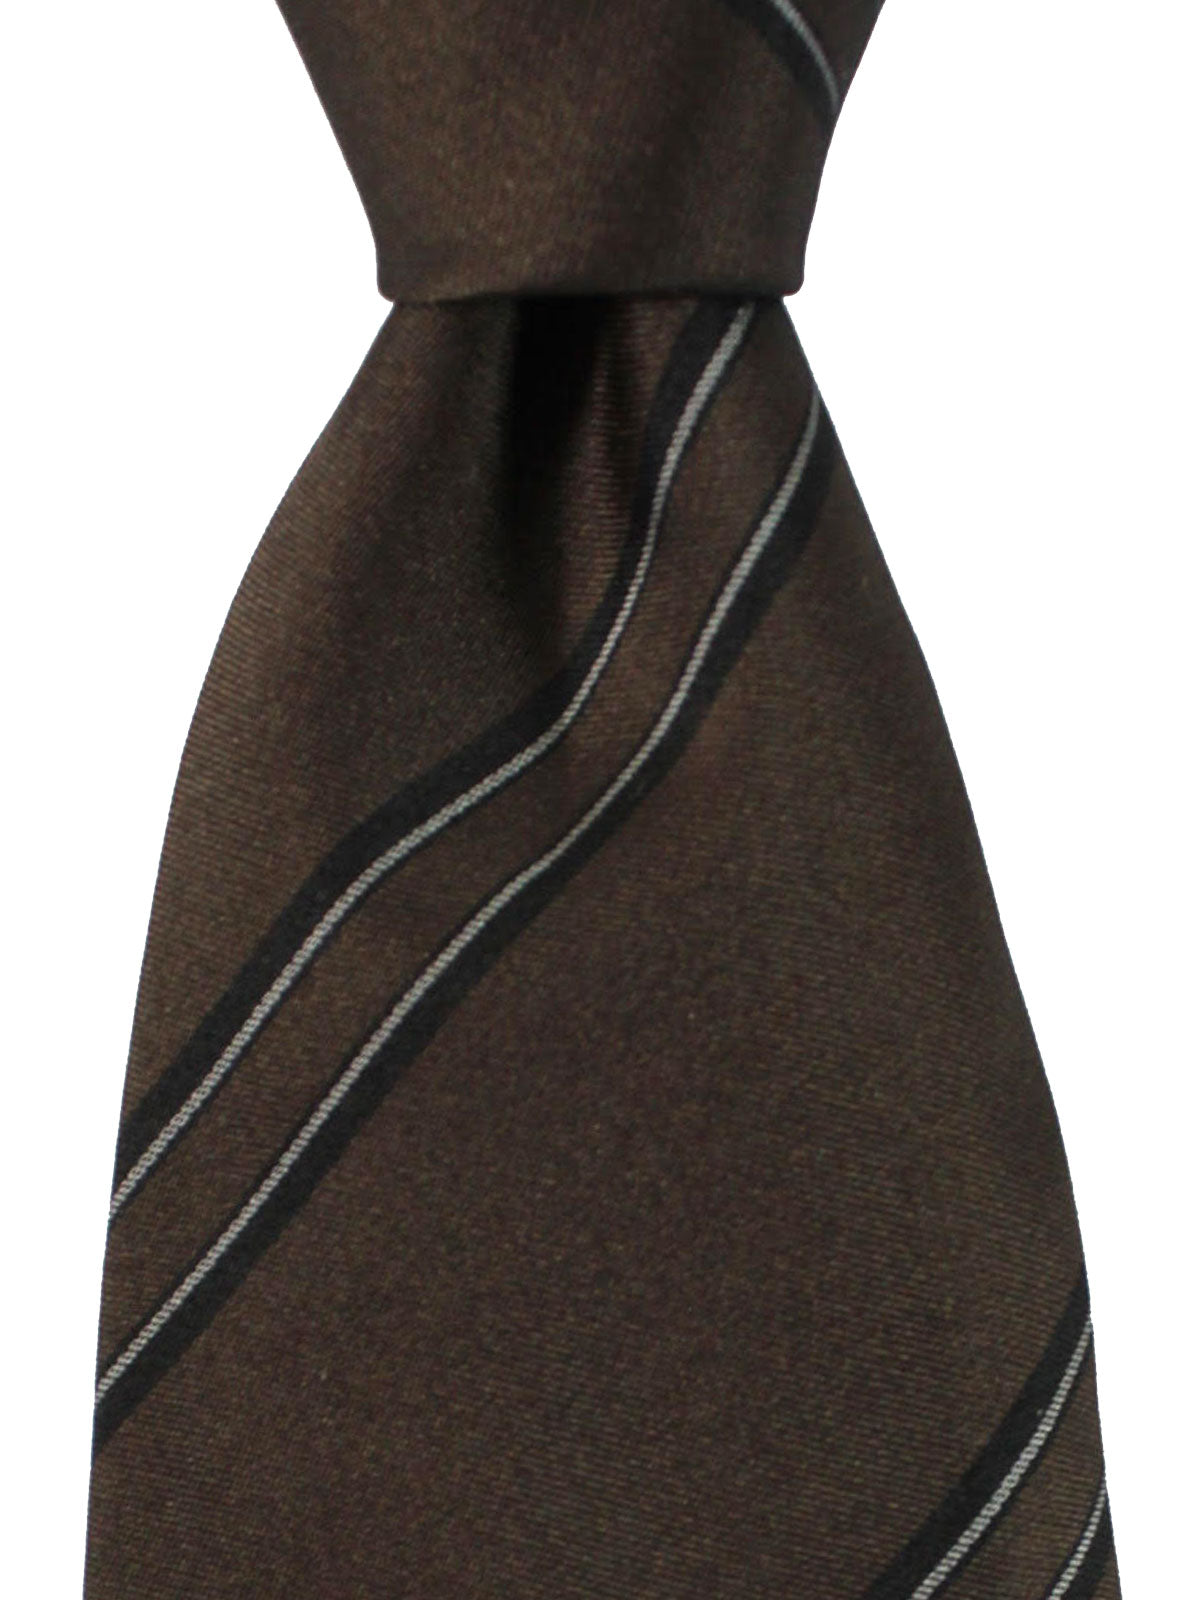 Tom Ford Tie Brown Stripes Hand Made In Italy